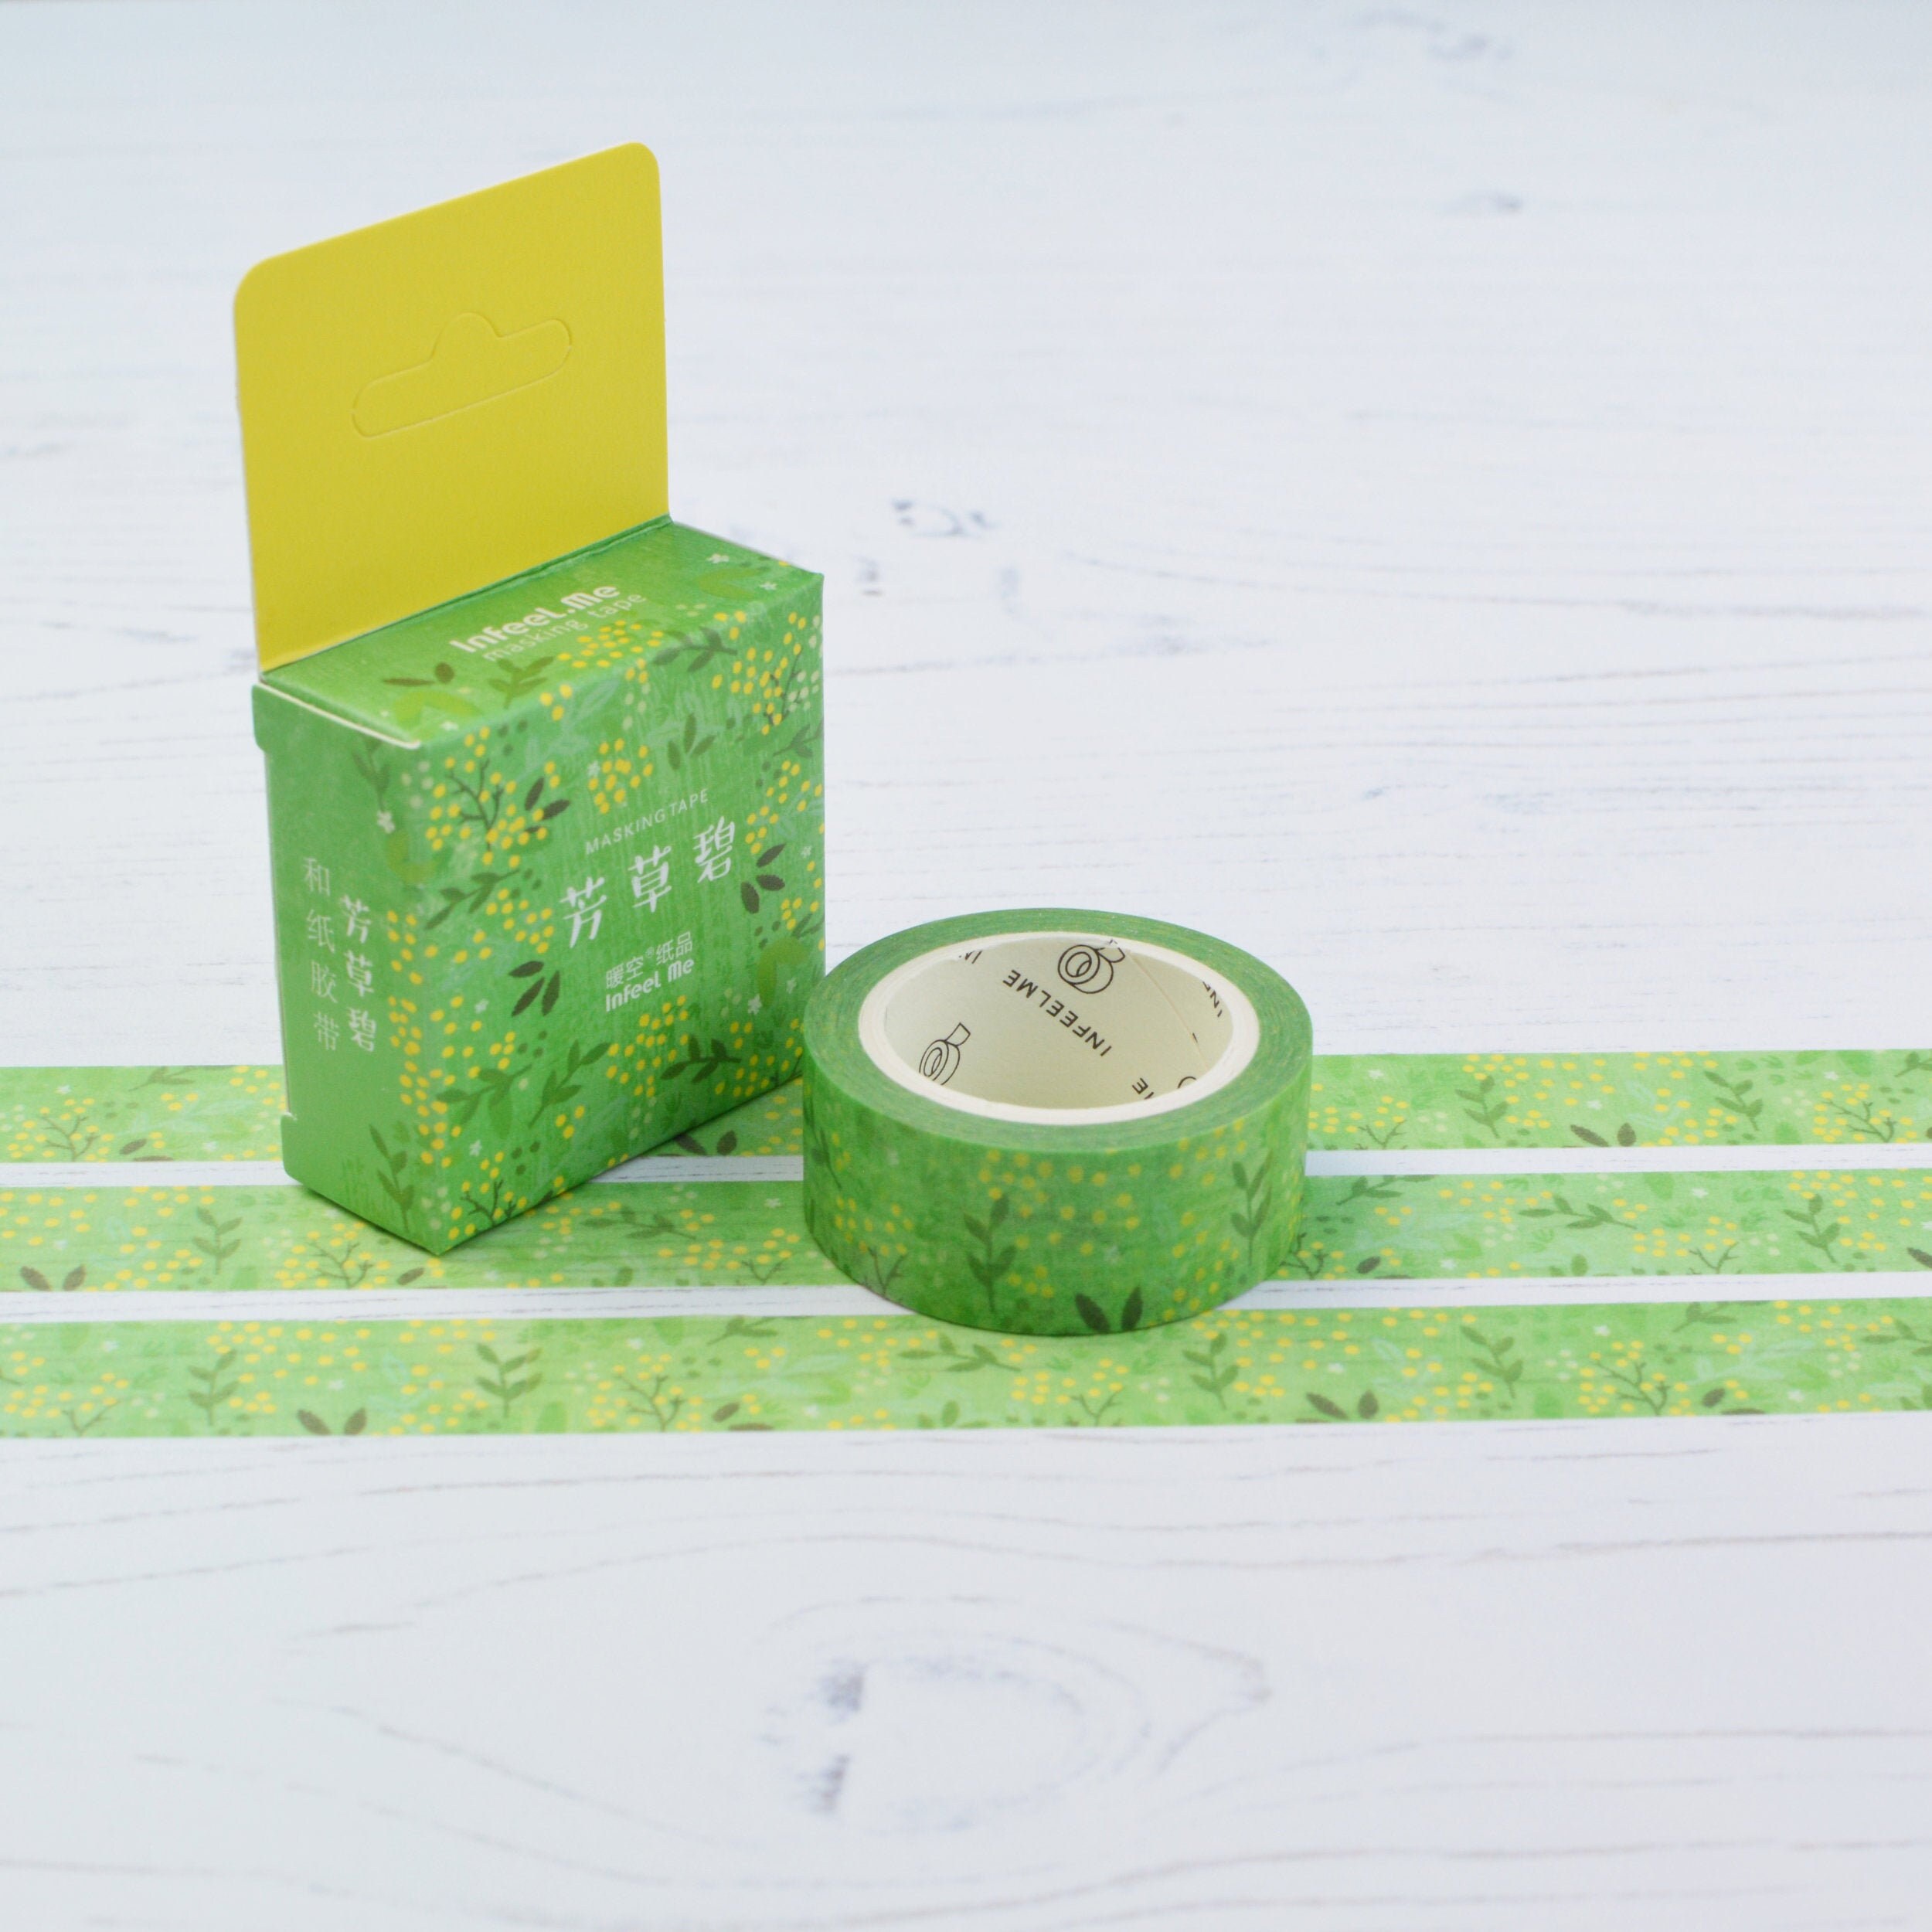 Floral Washi Tape, Eco Friendly Tape, Flowers, Stationery, Bullet Journal,  Planner, Masking Tape, Decorative Tape, Scrapbooking, Spring 